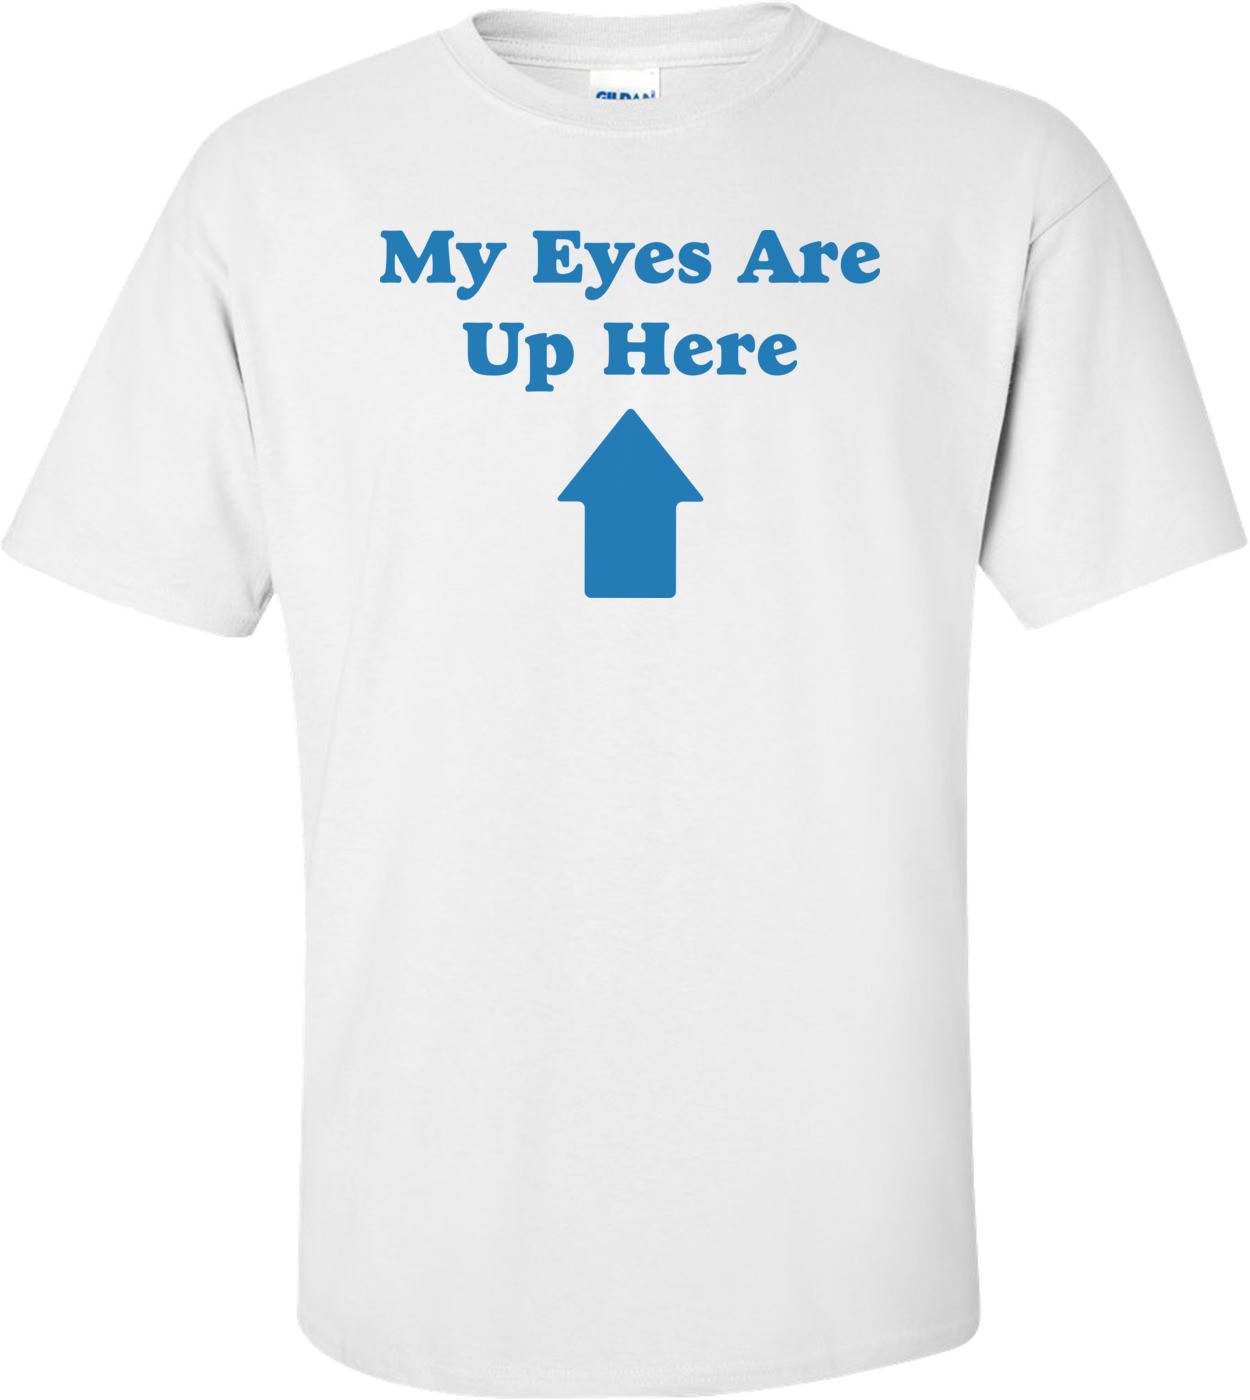 My Eyes Are Up Here T-shirt